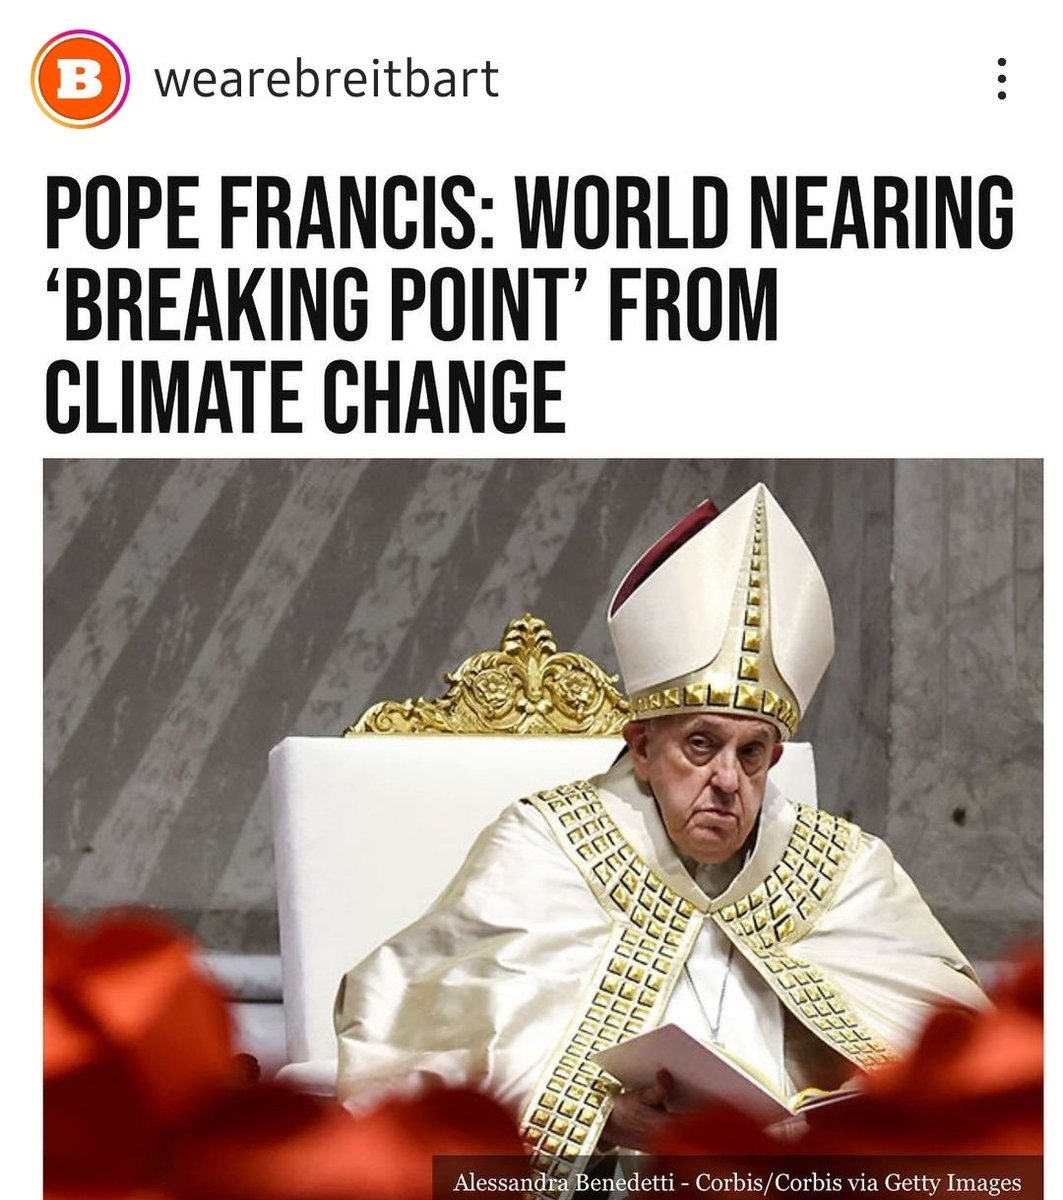 🤣 wrong Francis. The world is nearing a 'breaking point' from Marxists. We're not going to let it happen, tho. 🖕